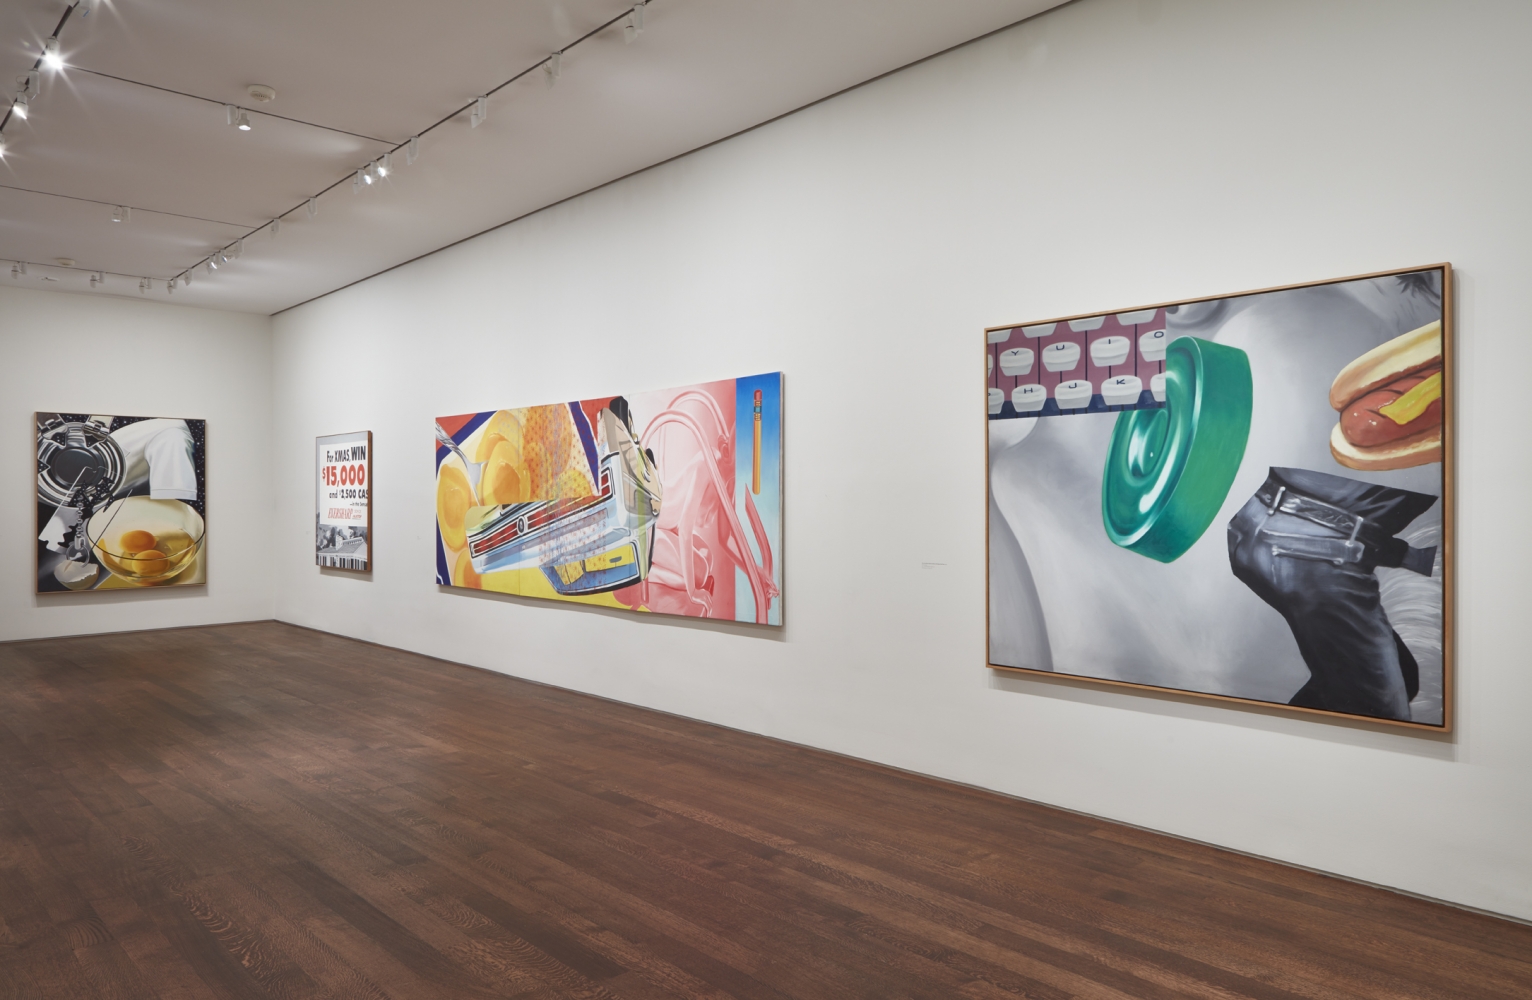 Installation view of James Rosenquist: His American Life, October 25 - December 7, 2018. © Estate of James Rosenquist / Licensed by VAGA at ARS, New York.